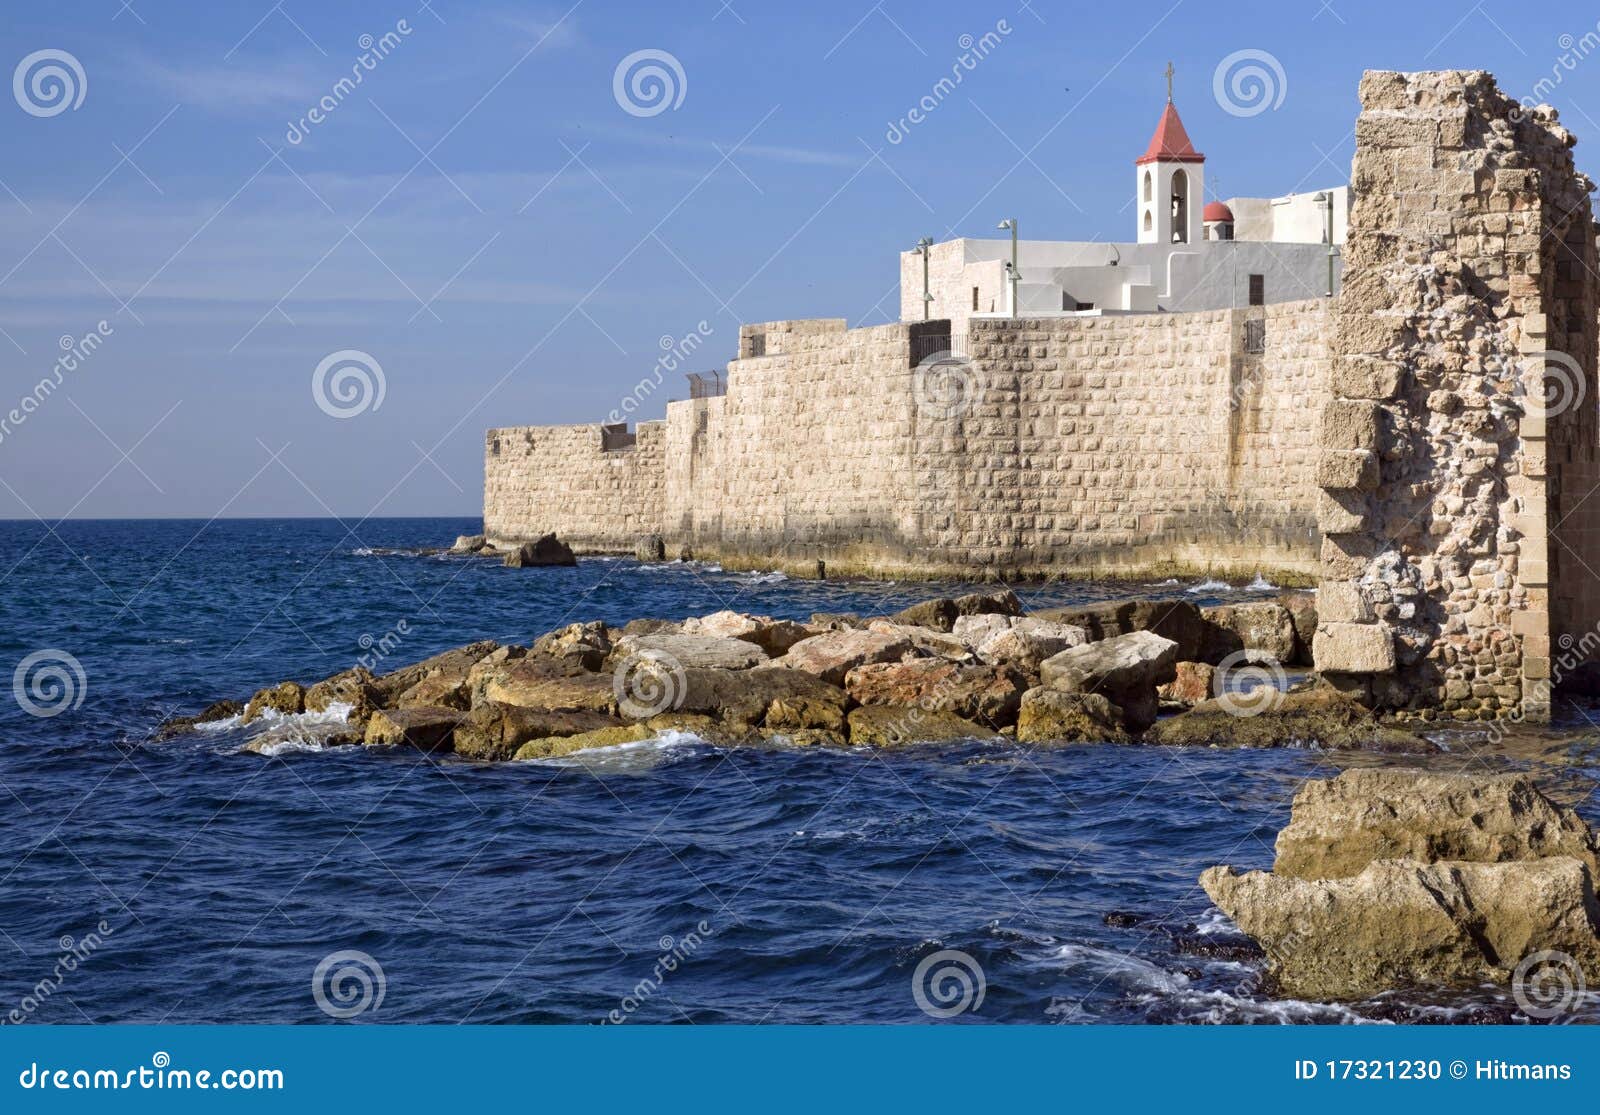 a view of acre ancient city walls